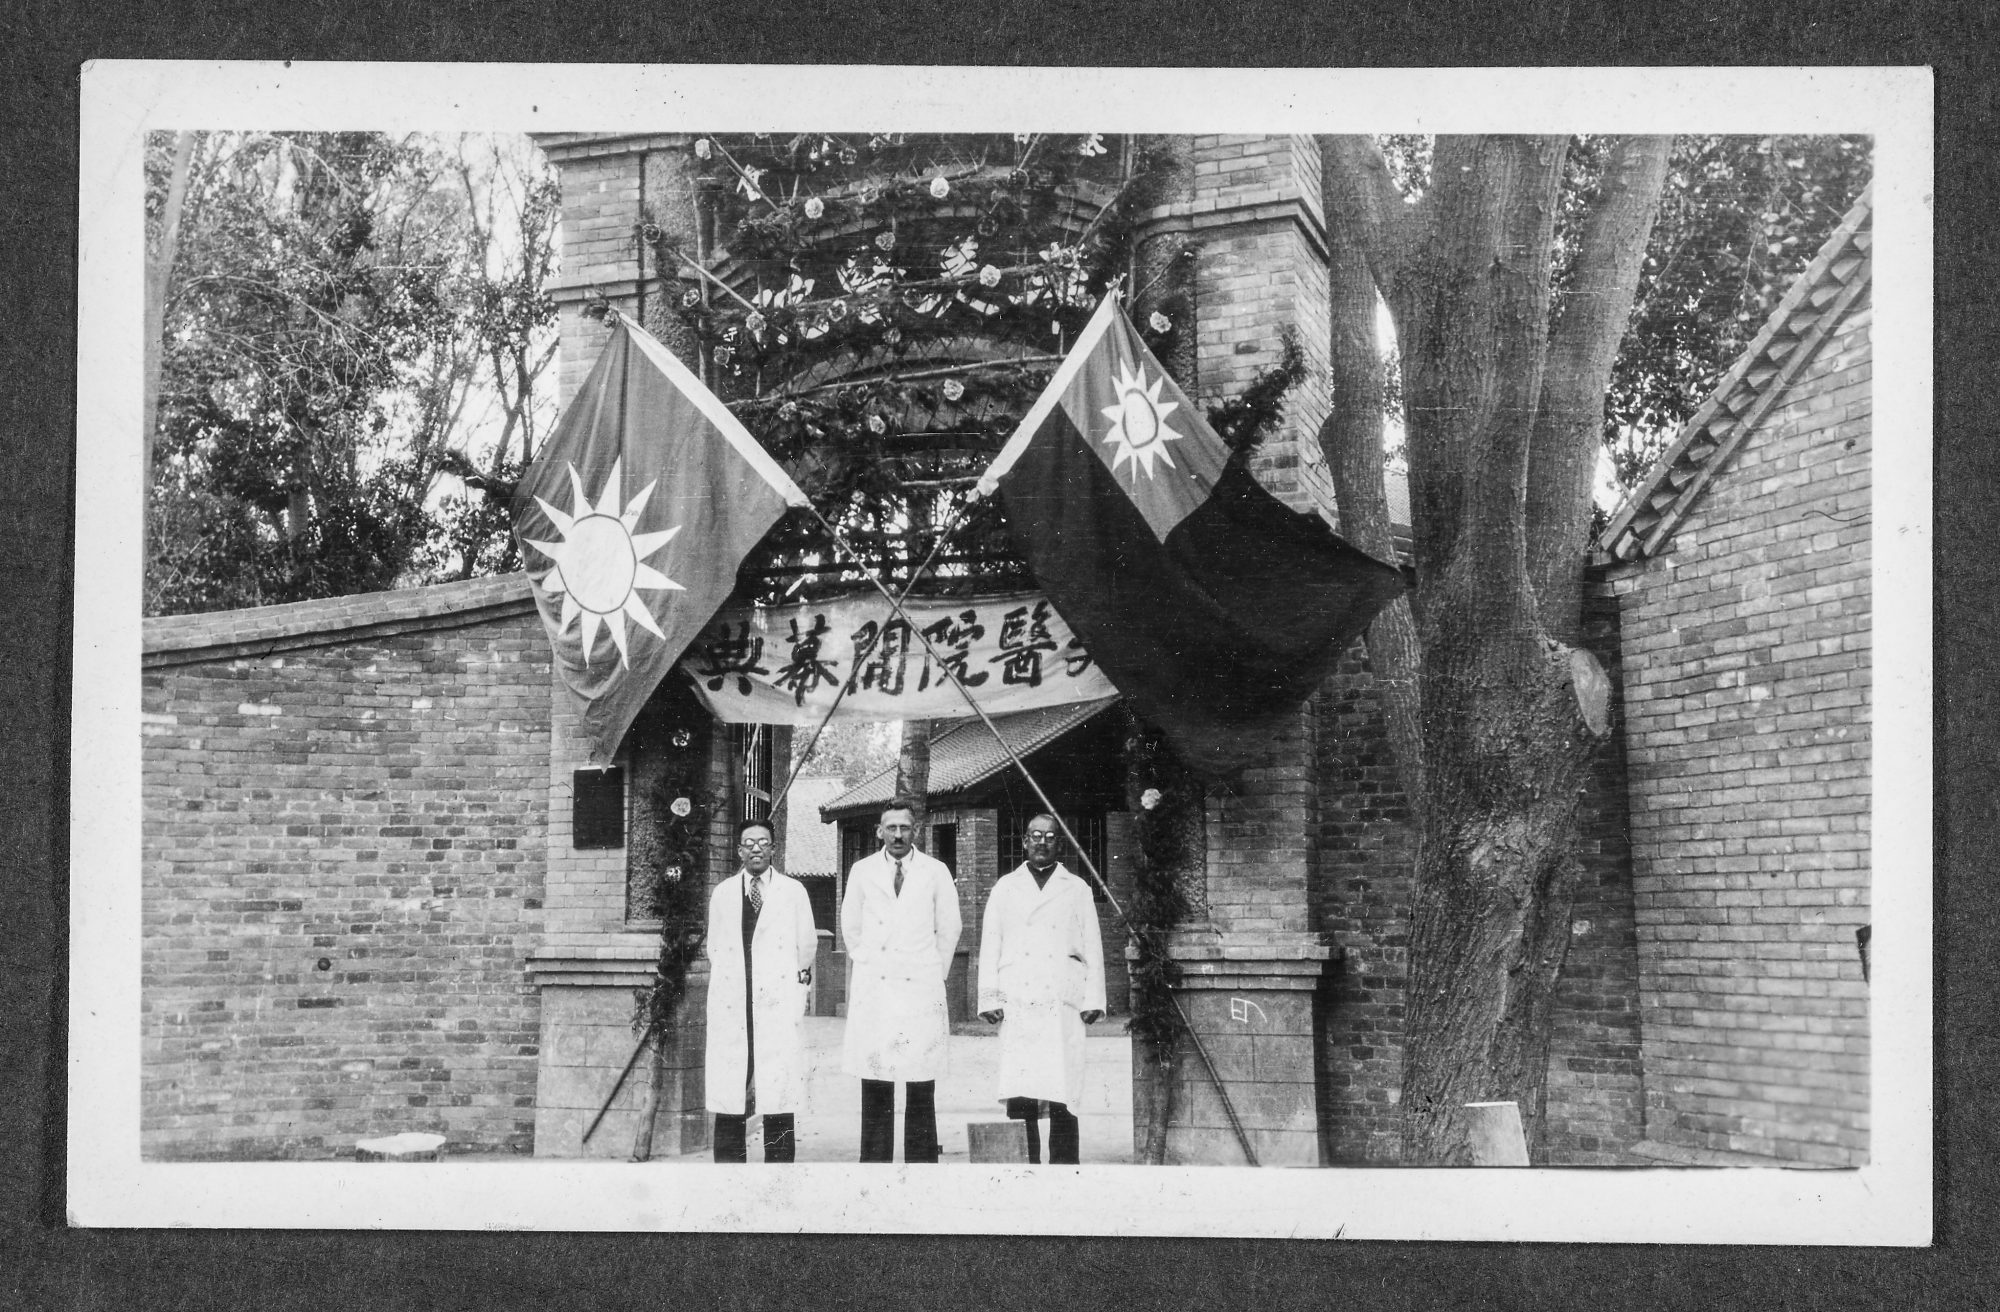 Dr. S.E. Ayers and two Chinese doctors stand at the gate of Chengchow Hospital on its opening day in 1936.